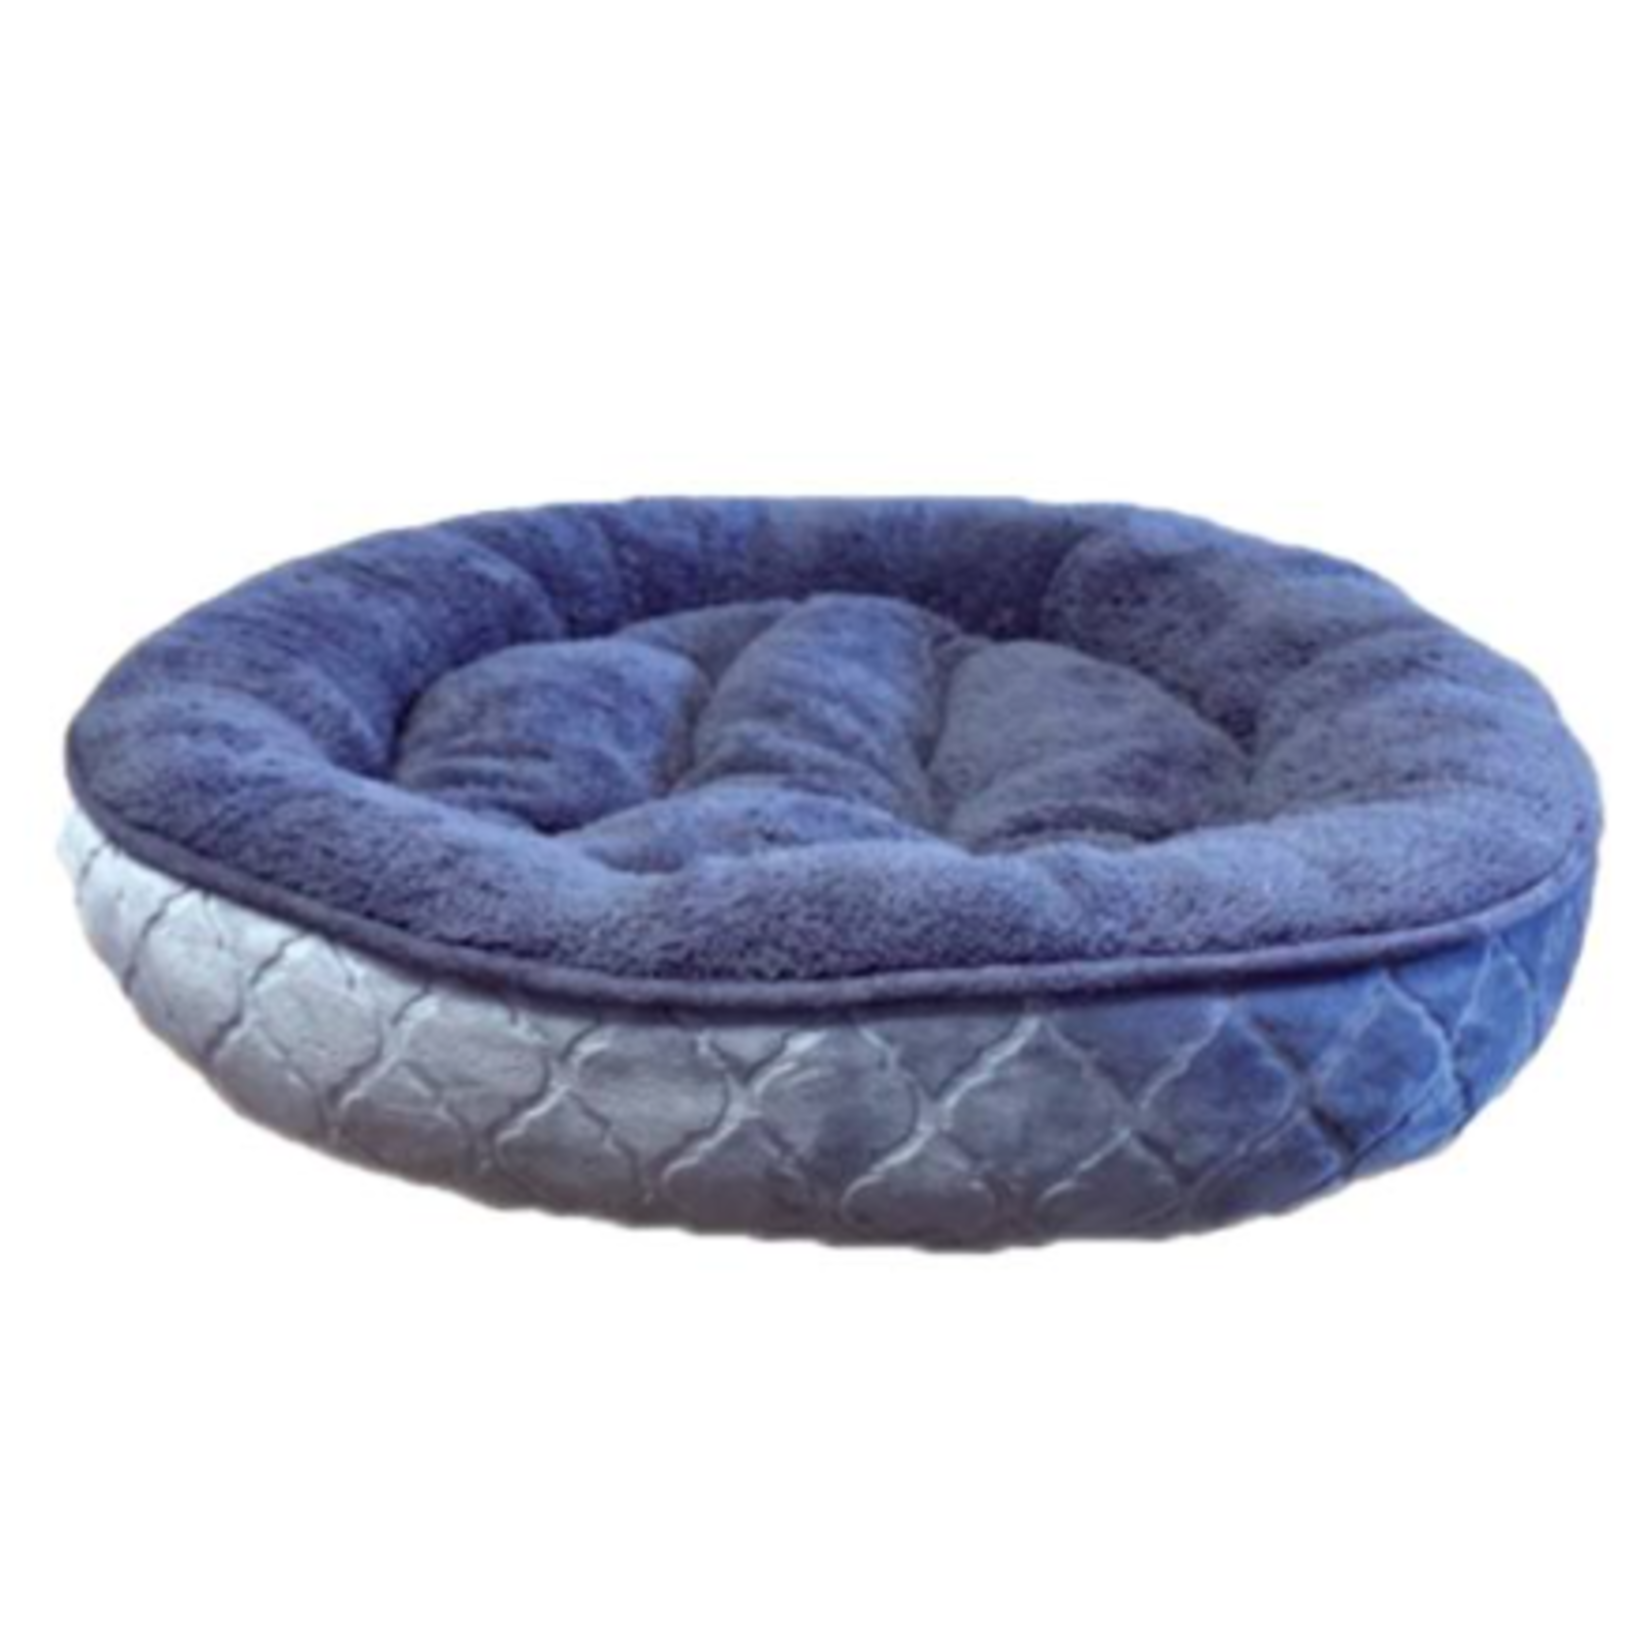 Four Paws Cozy Bed for Small Dogs & Cats - 20 x 20 x 5 in